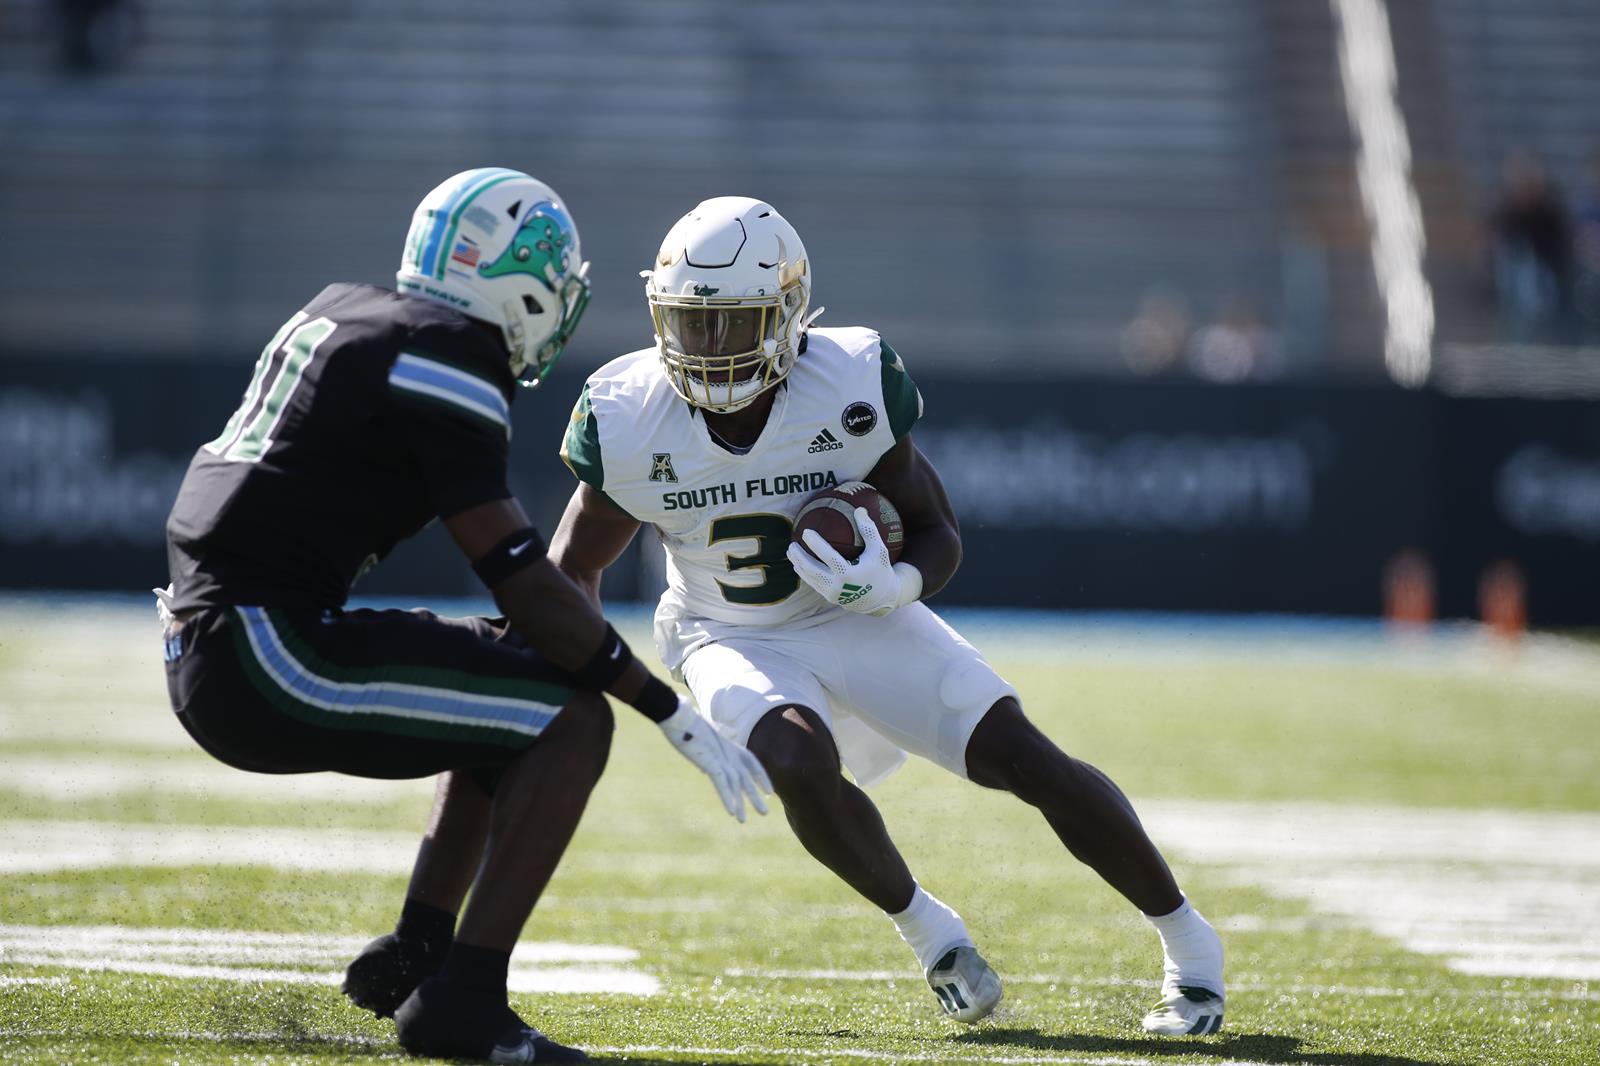 USF Football Preview: How Much Will Bulls Improve? - FanBuzz